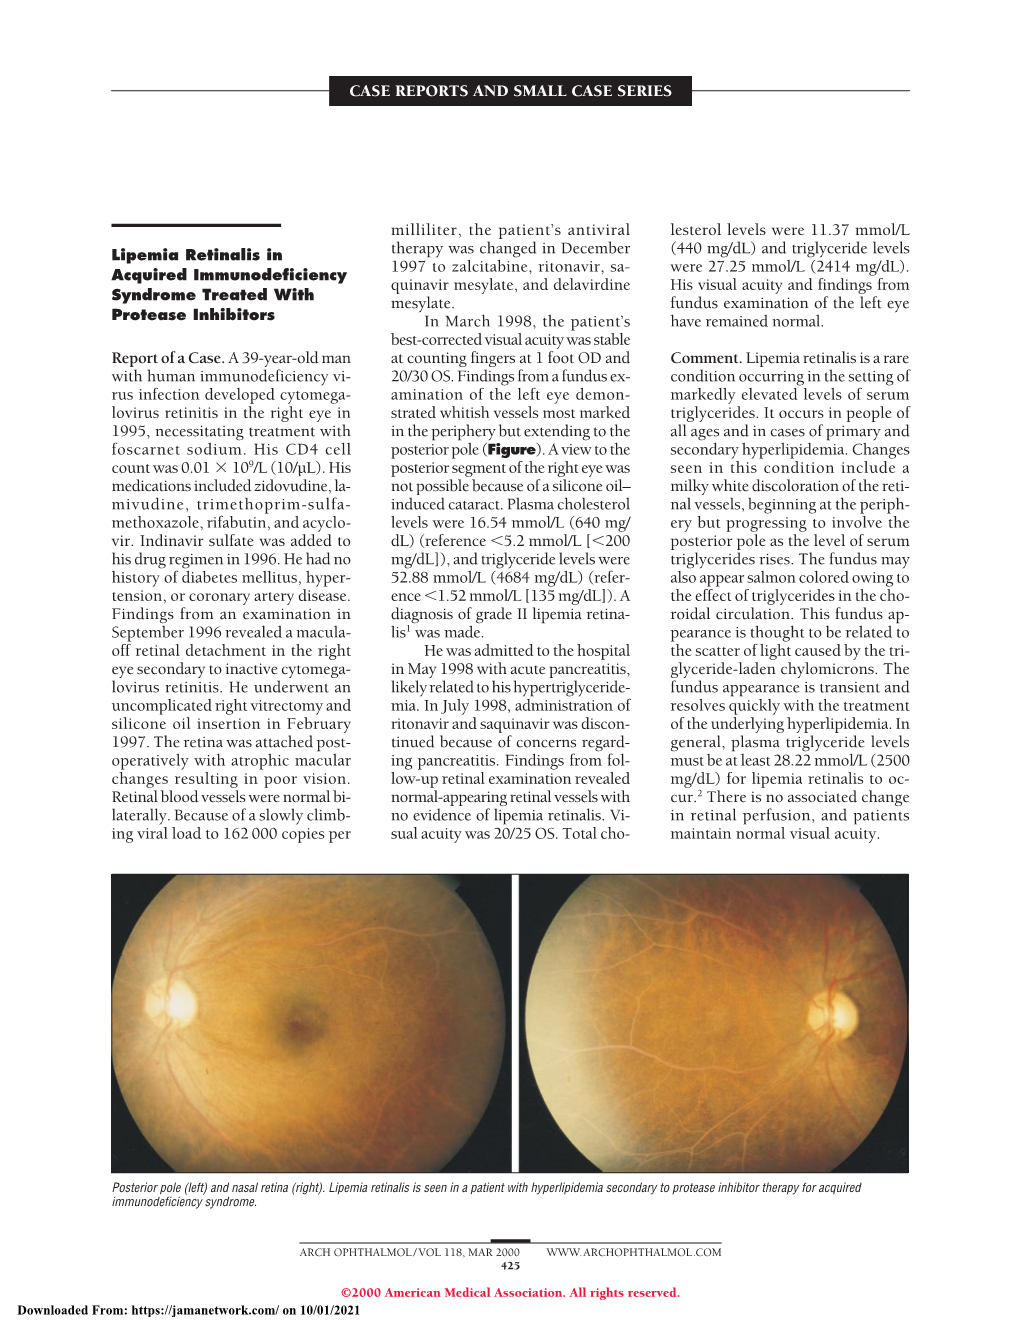 Retinal Toxic Effects Associated with Intravitreal Fomivirsen